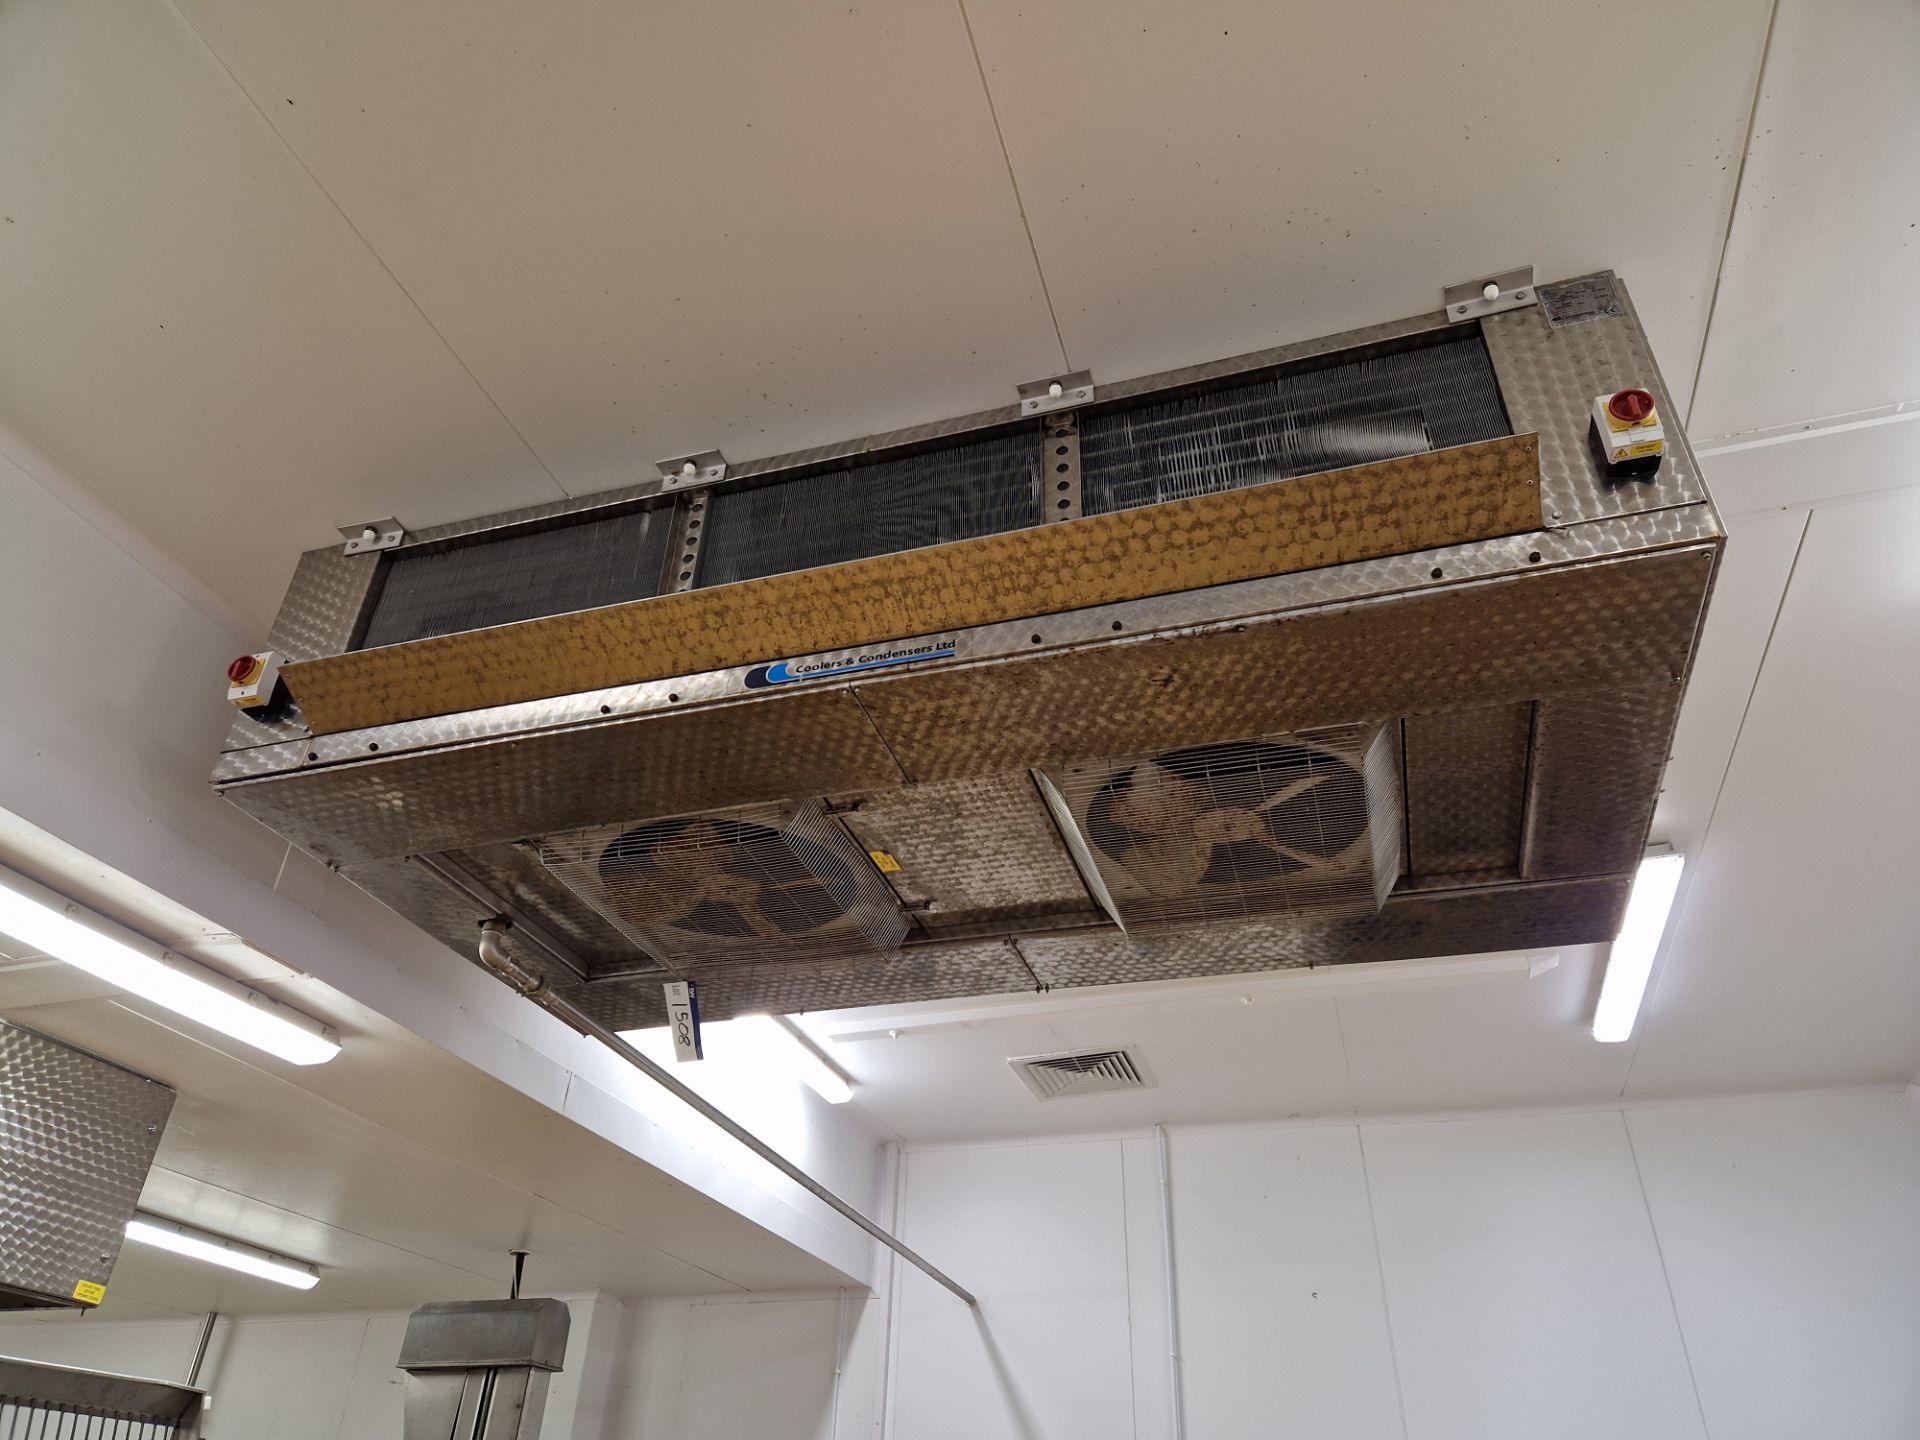 Coolers & Condensers Ltd Twin Fan Evaporator (Evaporator must be disconnected at closest